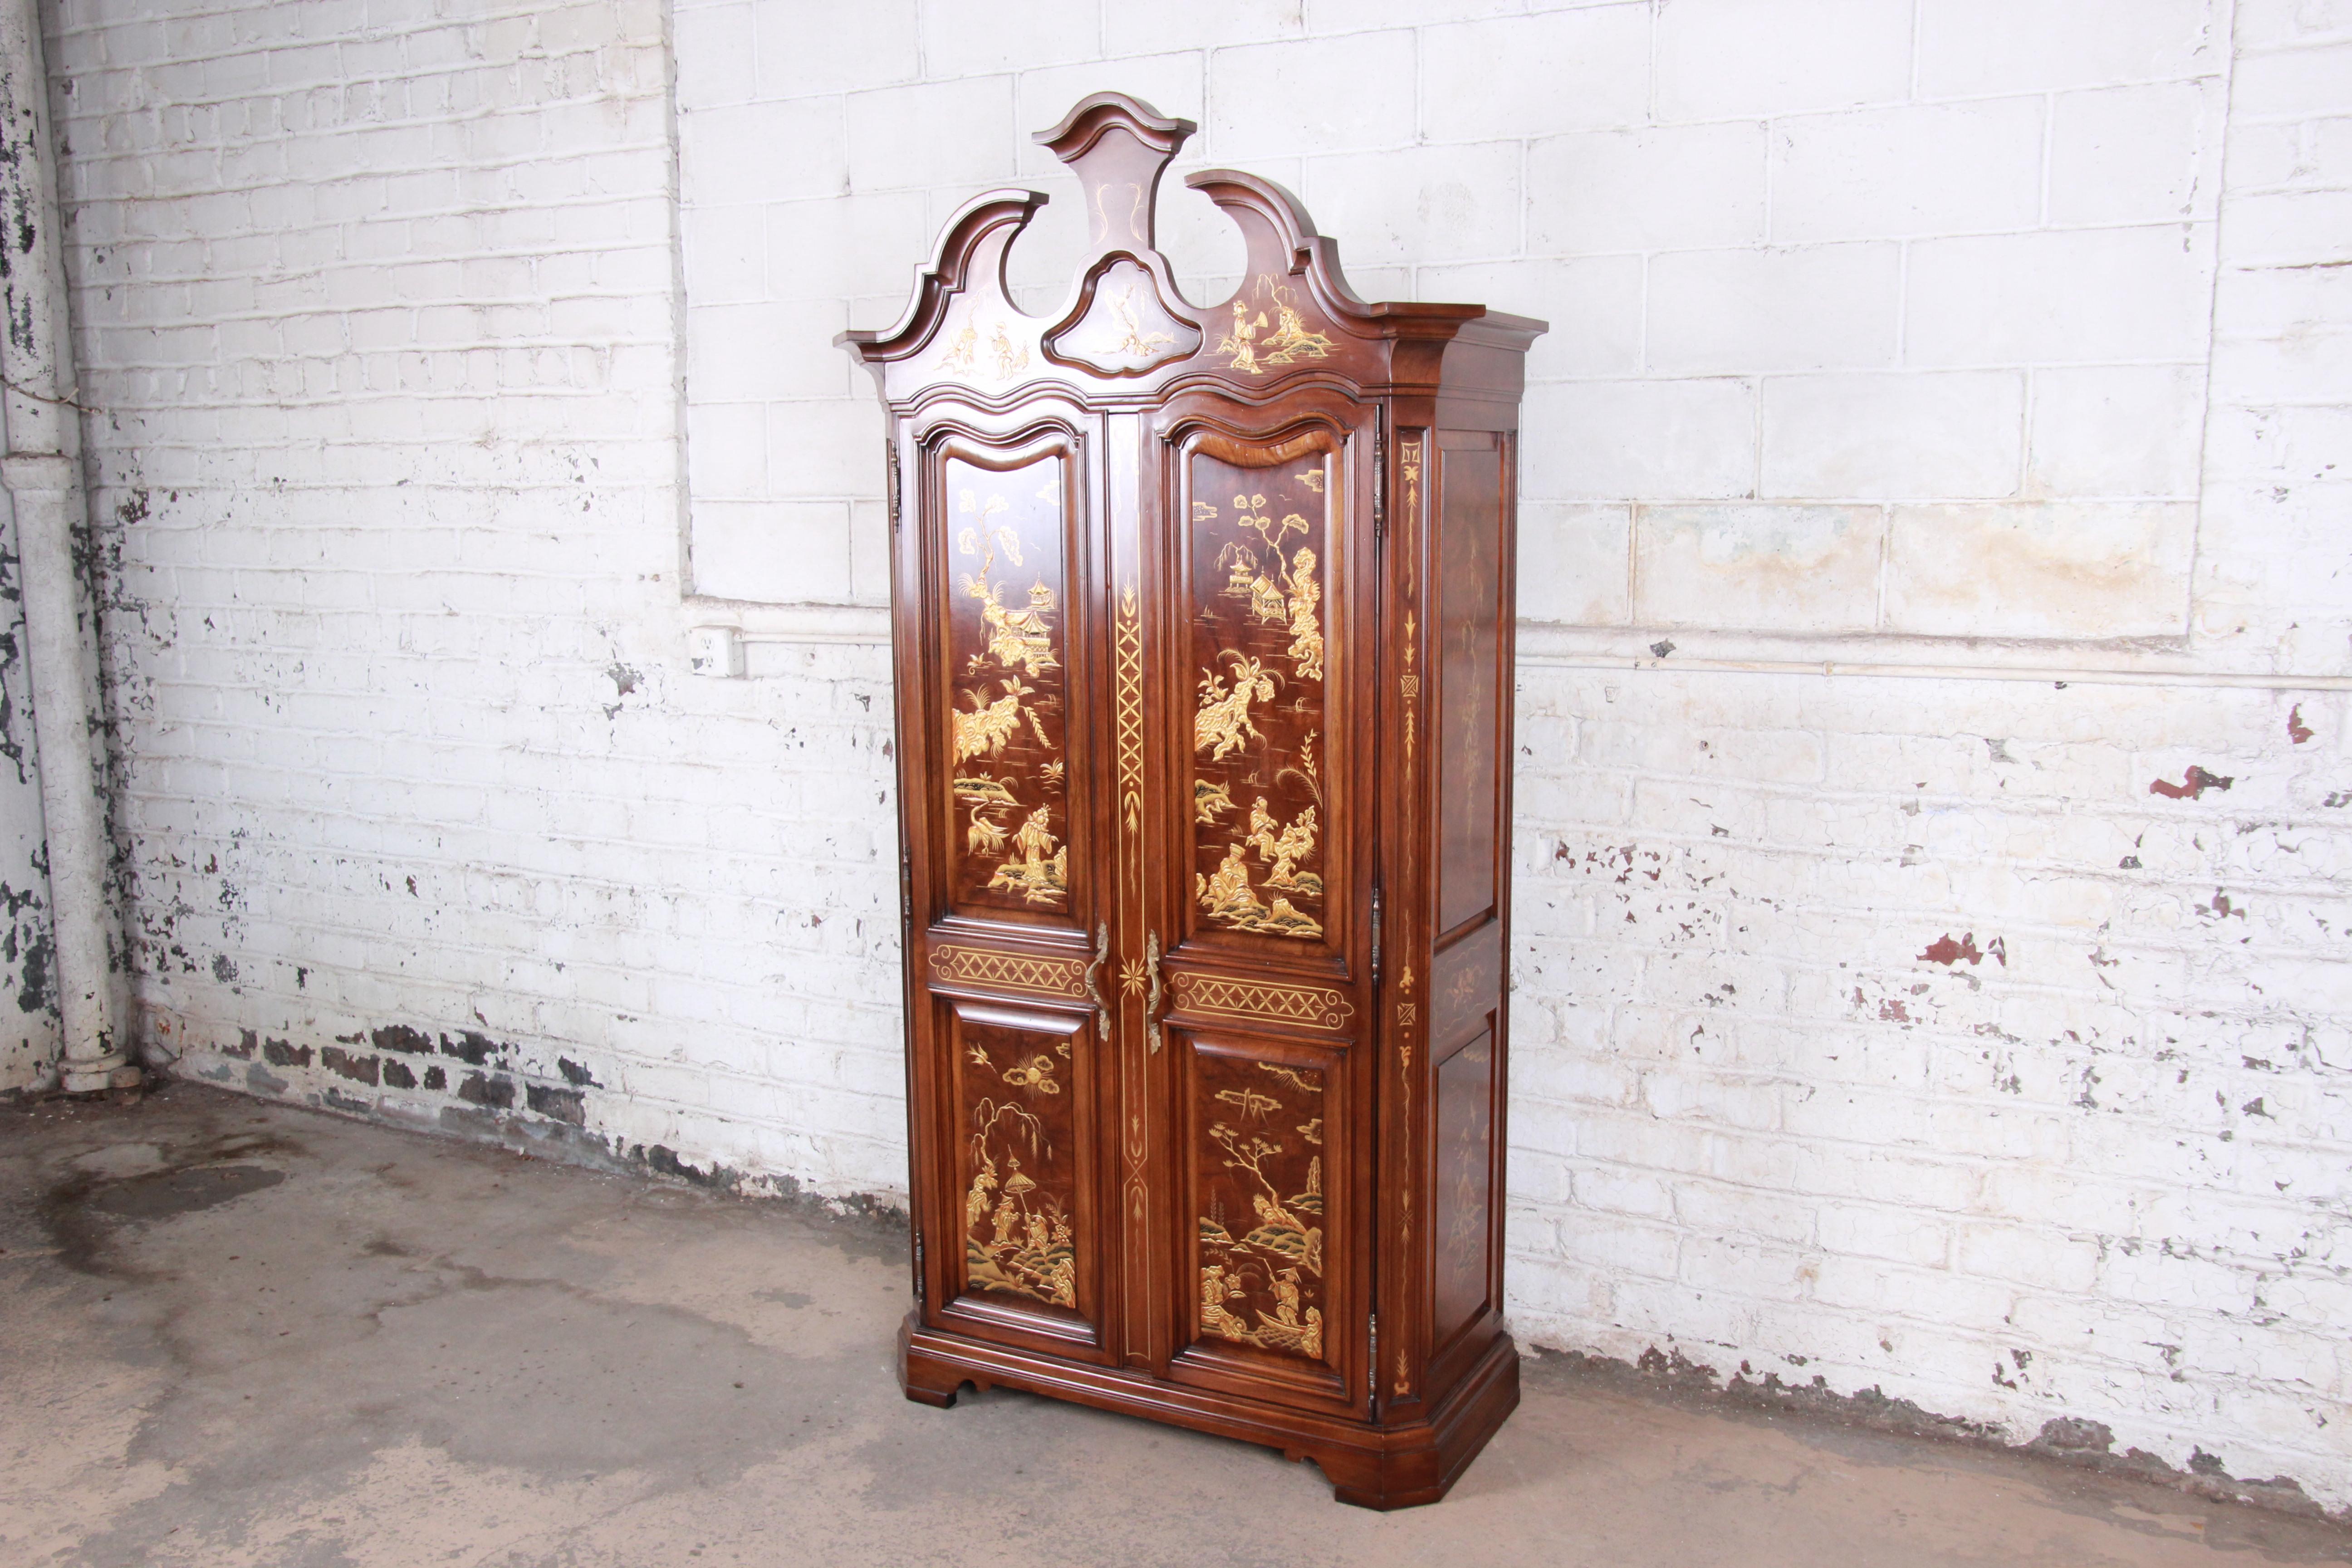 A rare and exceptional Hollywood Regency Chinoiserie armoire dresser

Made by Karges Furniture

USA, circa 1980s

Burlwood + cherry + figurative Asian scenes

Measures: 44.75